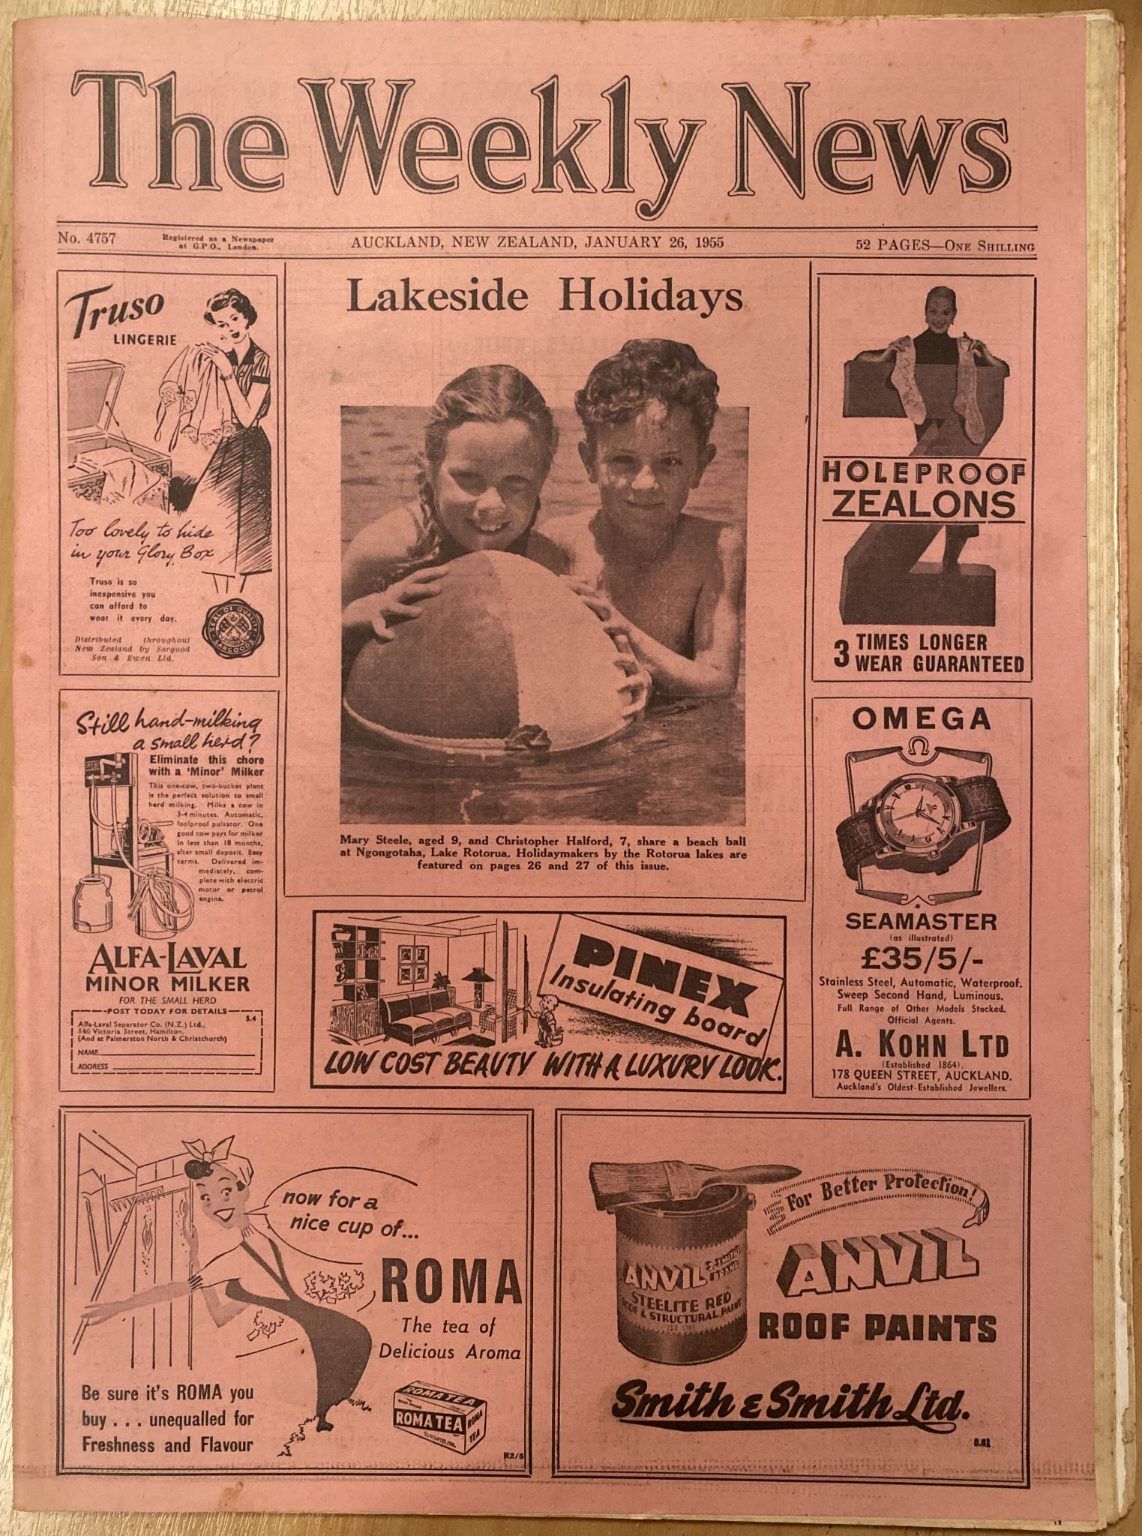 OLD NEWSPAPER: The Weekly News - No. 4757, 26 January 1955